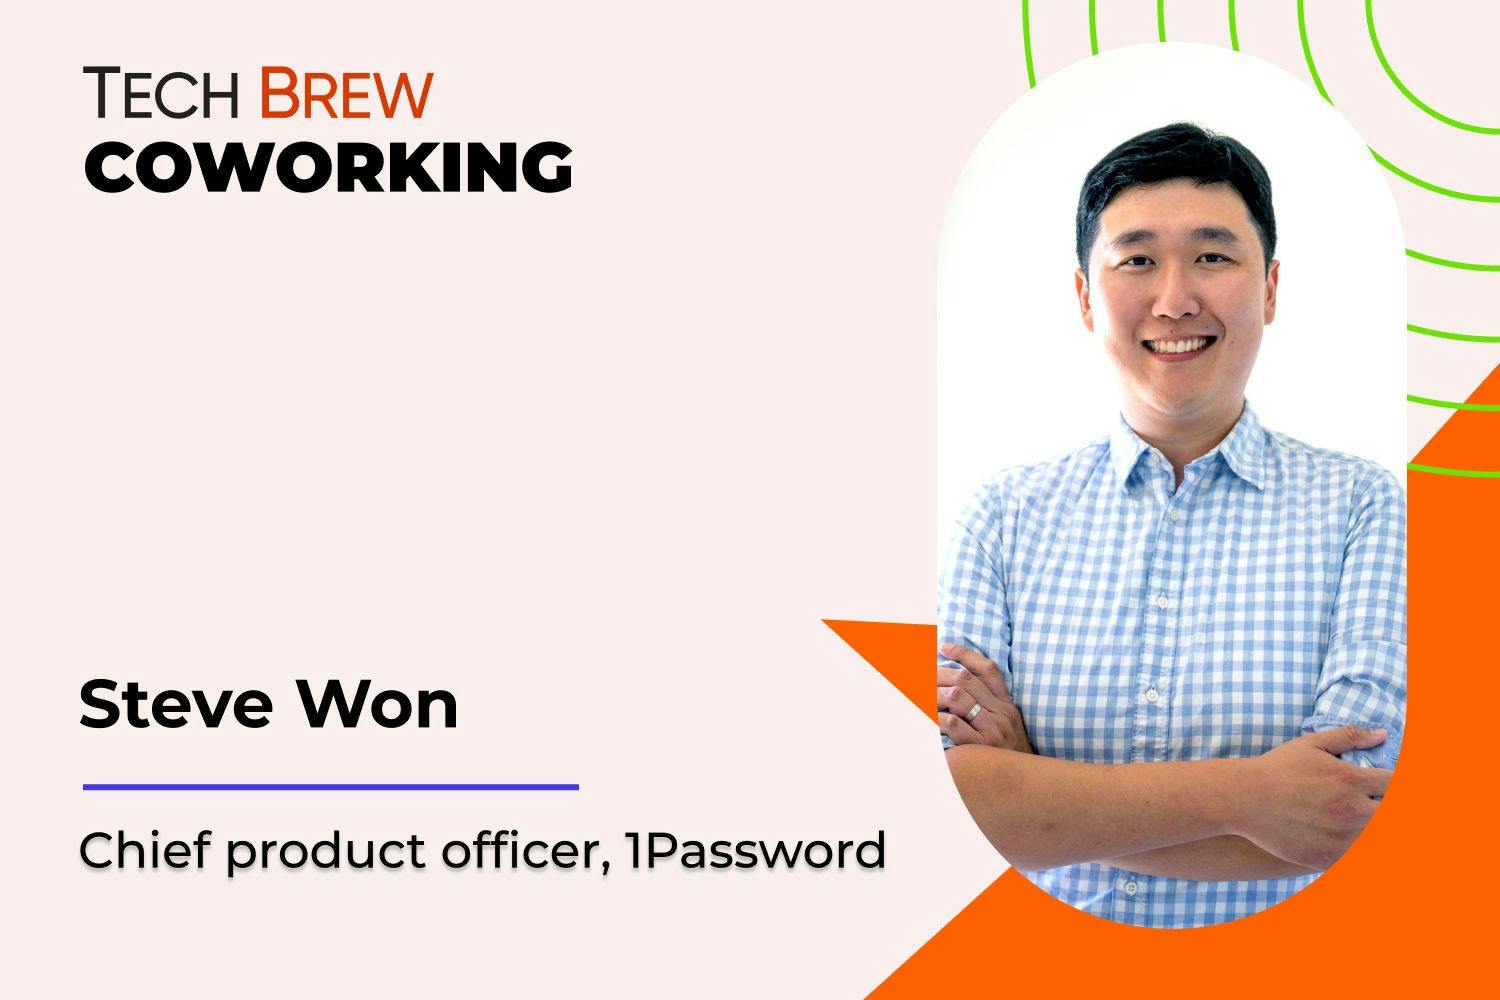 Steve Won, Chief Product Officer at 1Passwod